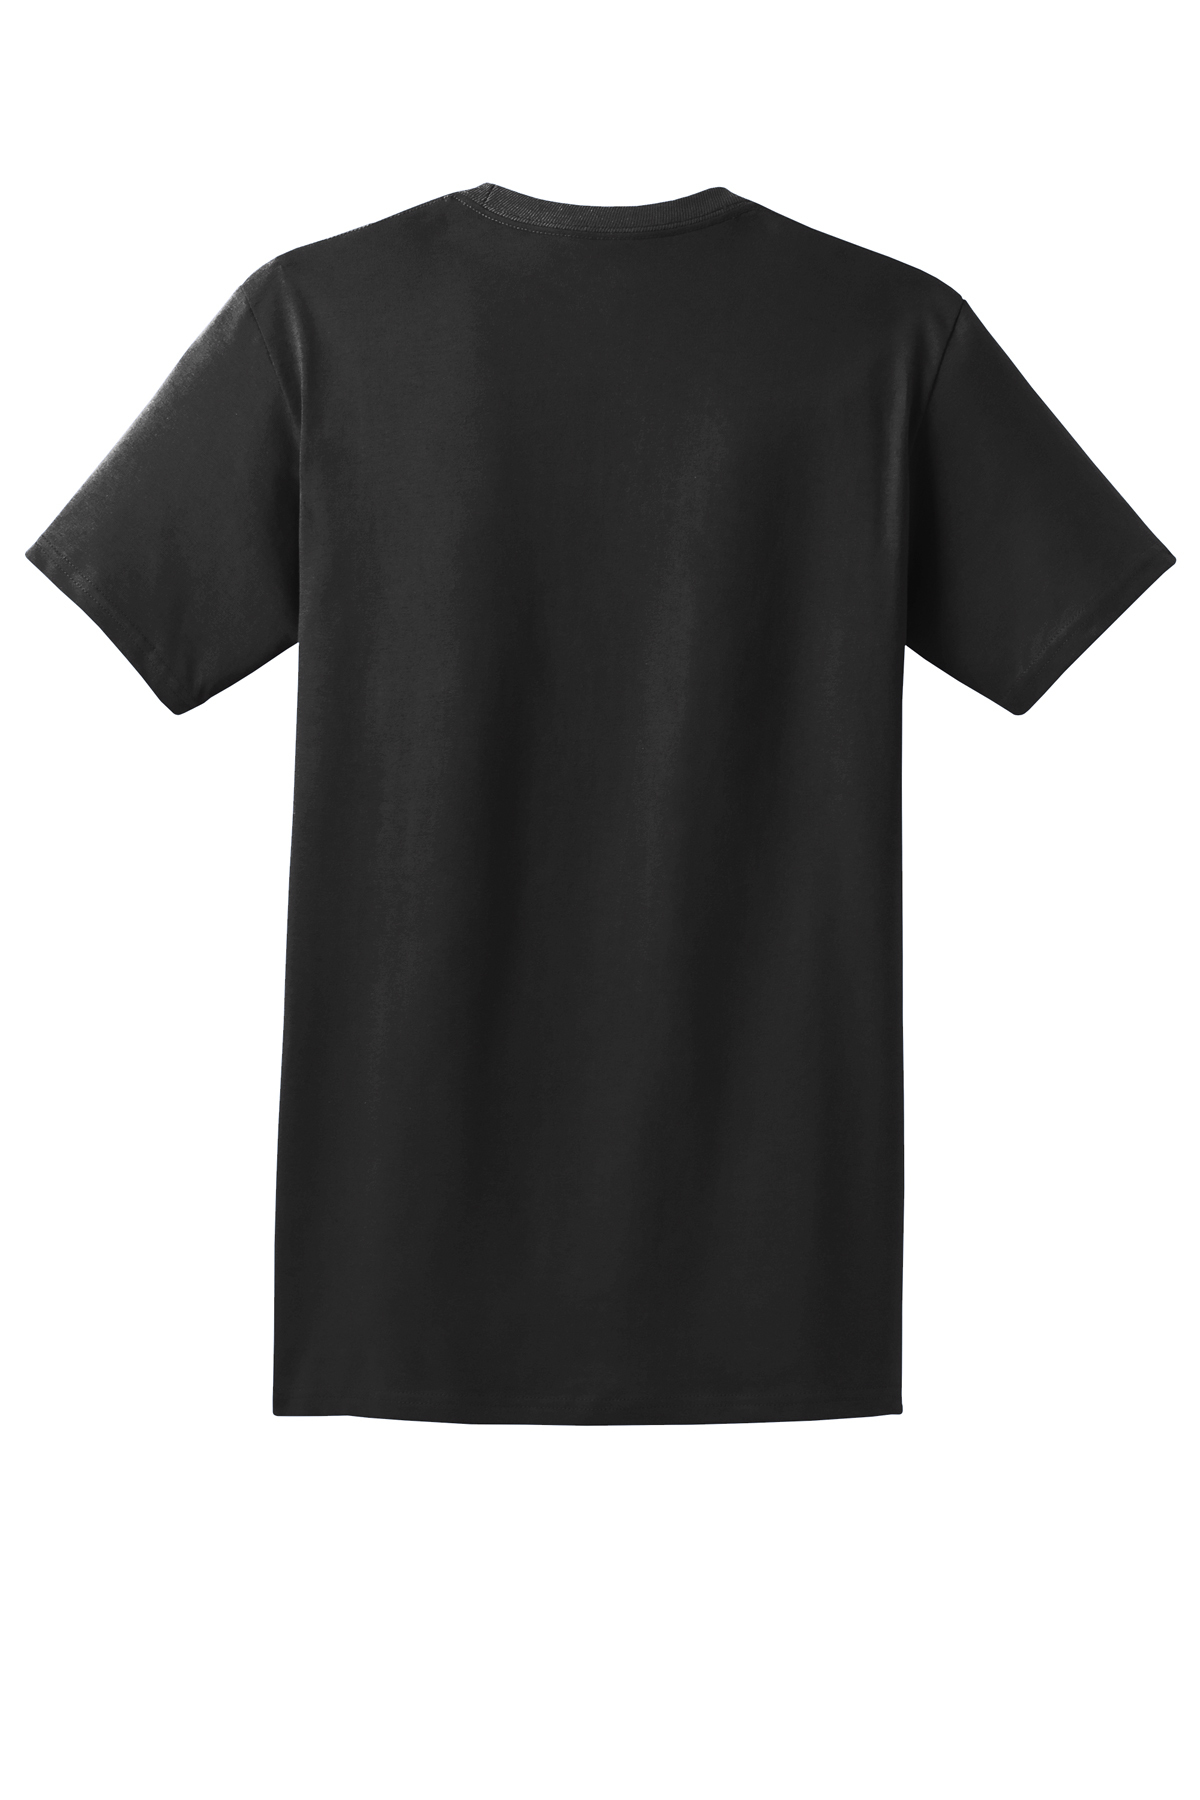 Hanes - Authentic 100% Cotton T-Shirt with Pocket | Product | Company ...